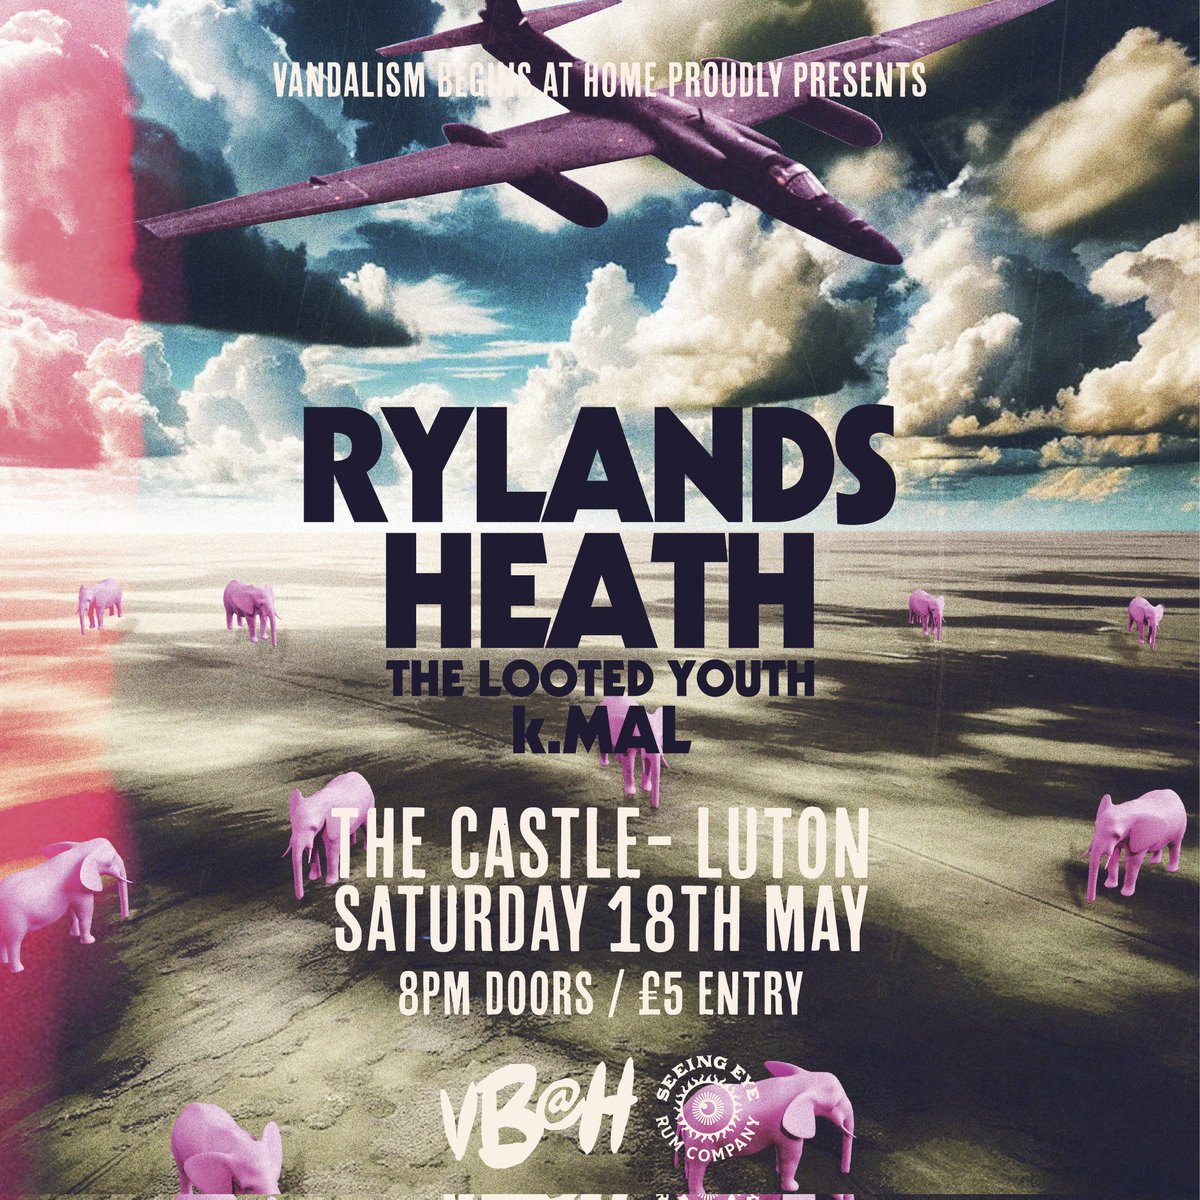 Big thanks to @SpacePistolBand Broken Castles & Utopia Development Corporation for wild performances last night - they blew the roof off! We go again at The Castle on 18/5 with the glorious return of Luton legends @RylandsHeath - along with the fabulous The Looted Youth & k.MAL